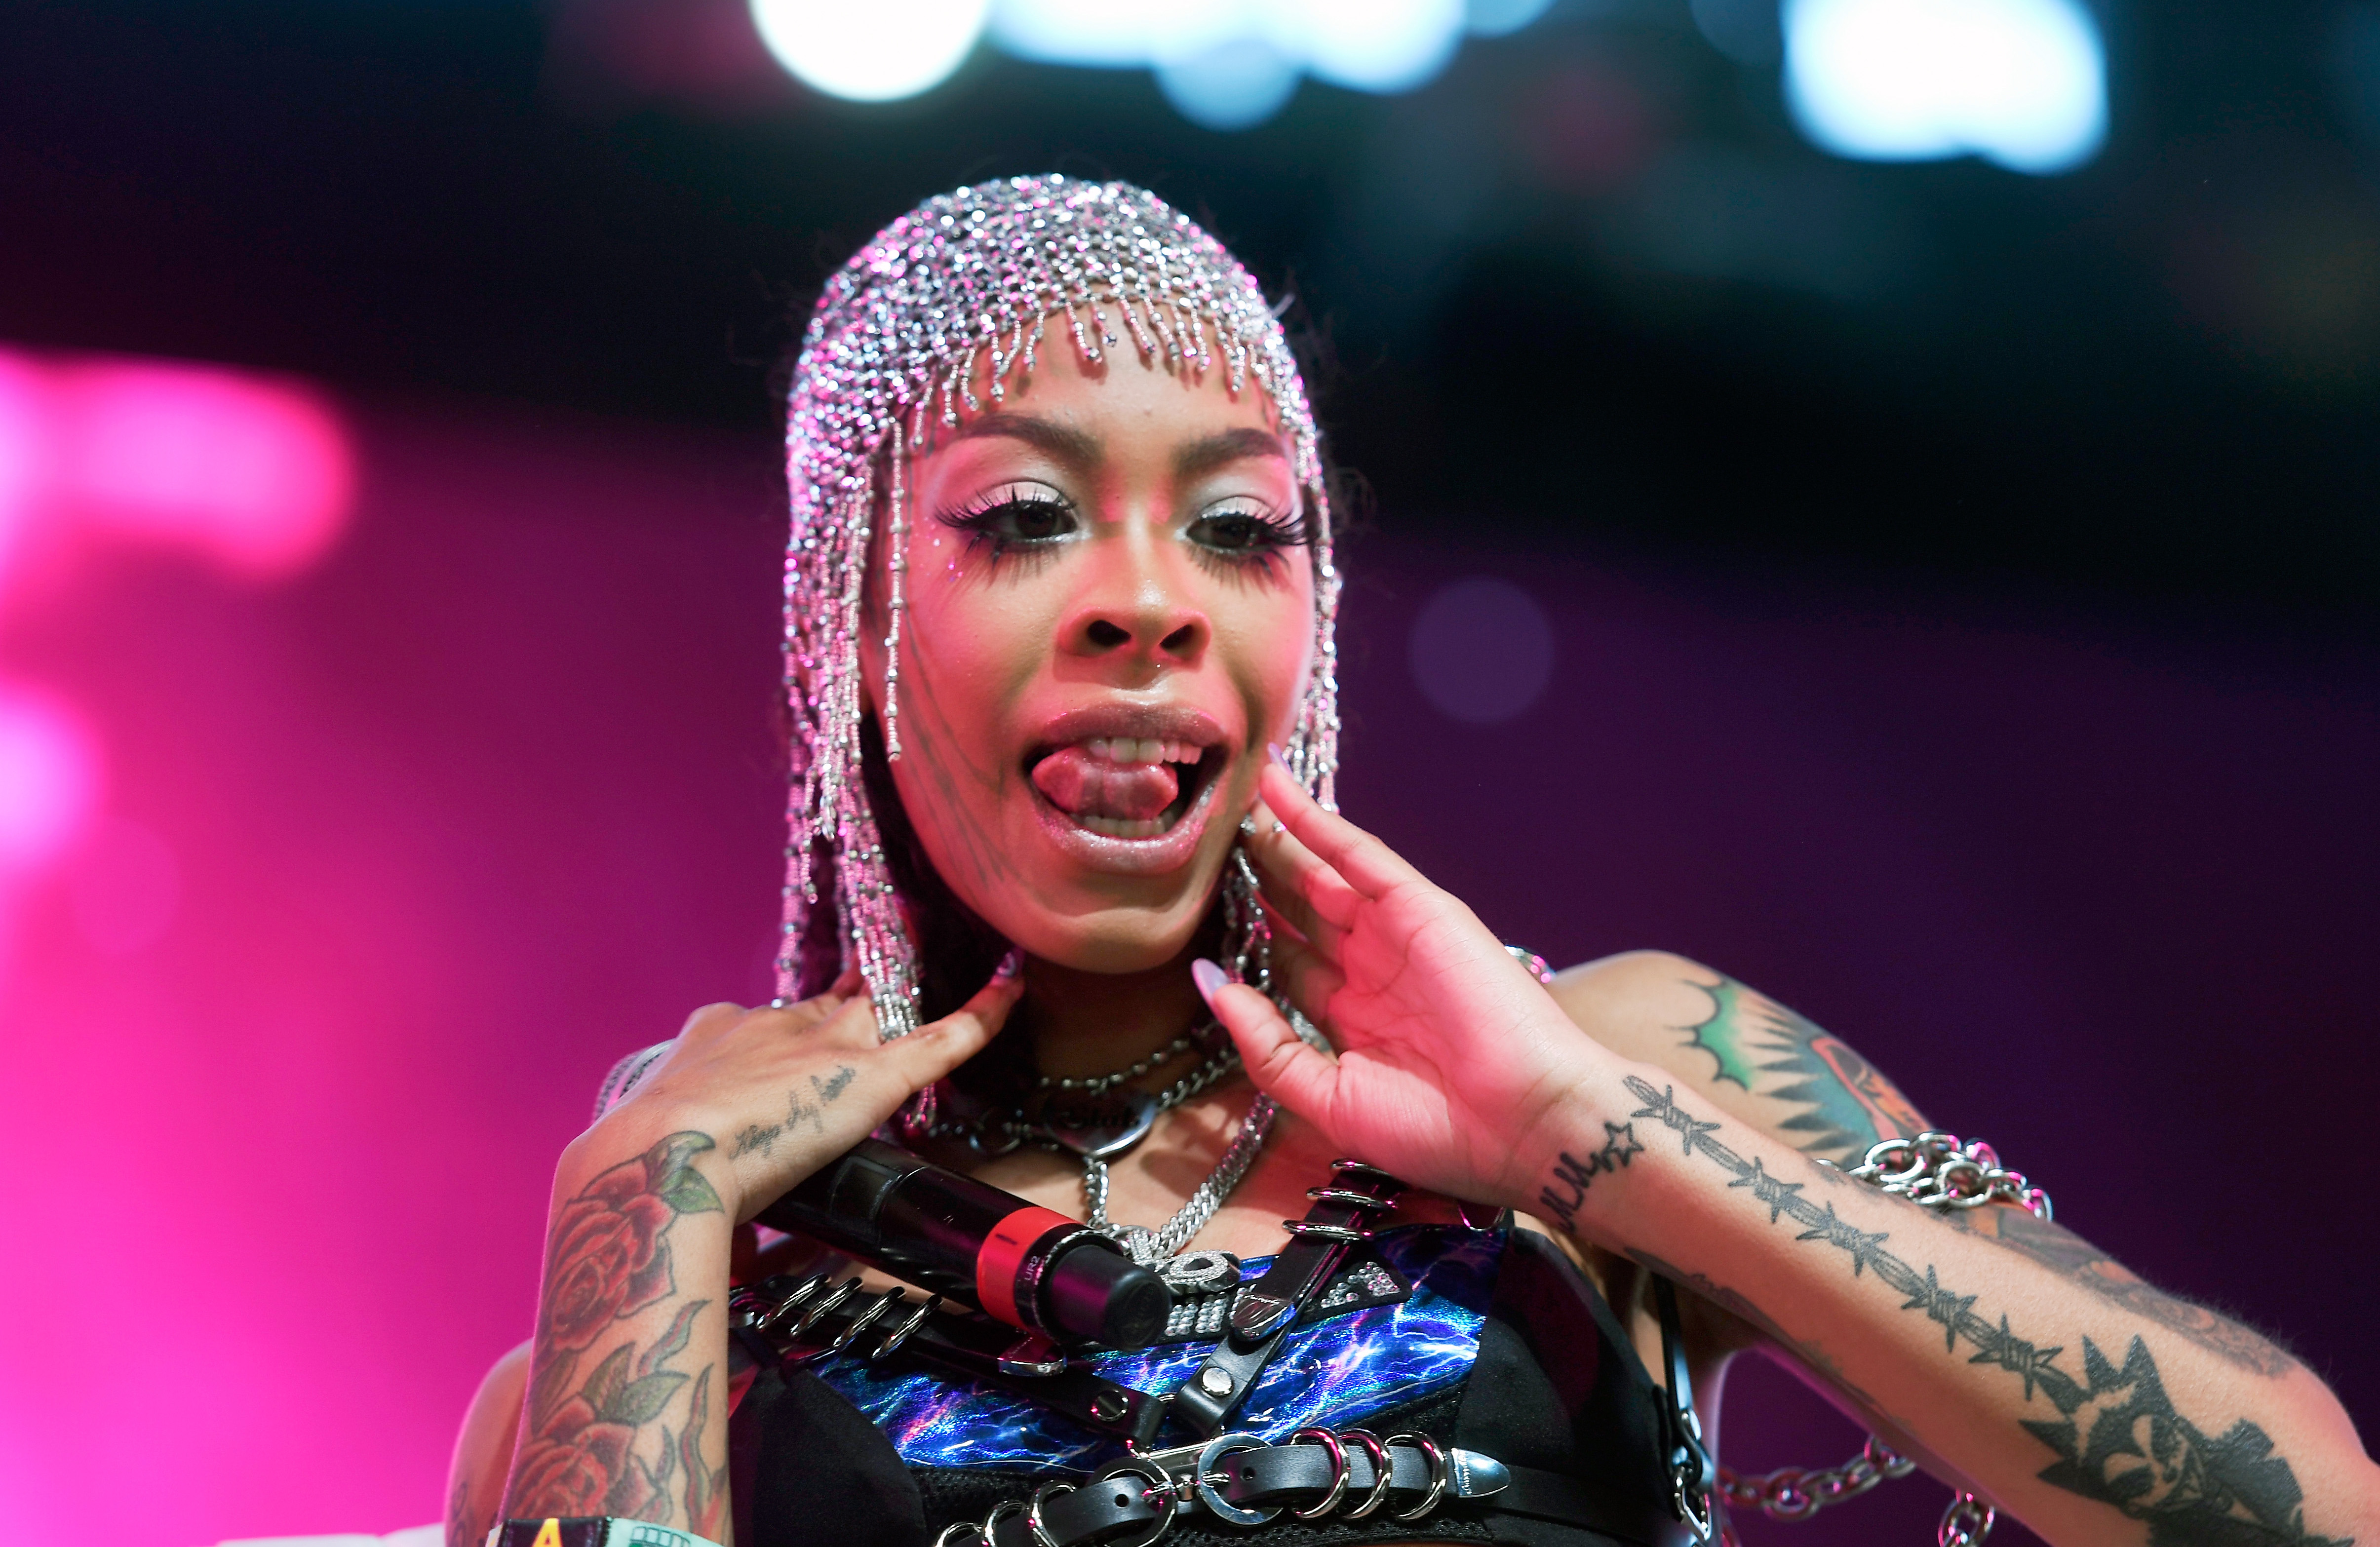 11 Songs by Rico Nasty That Show Why She’s One of the Hardest Rappers